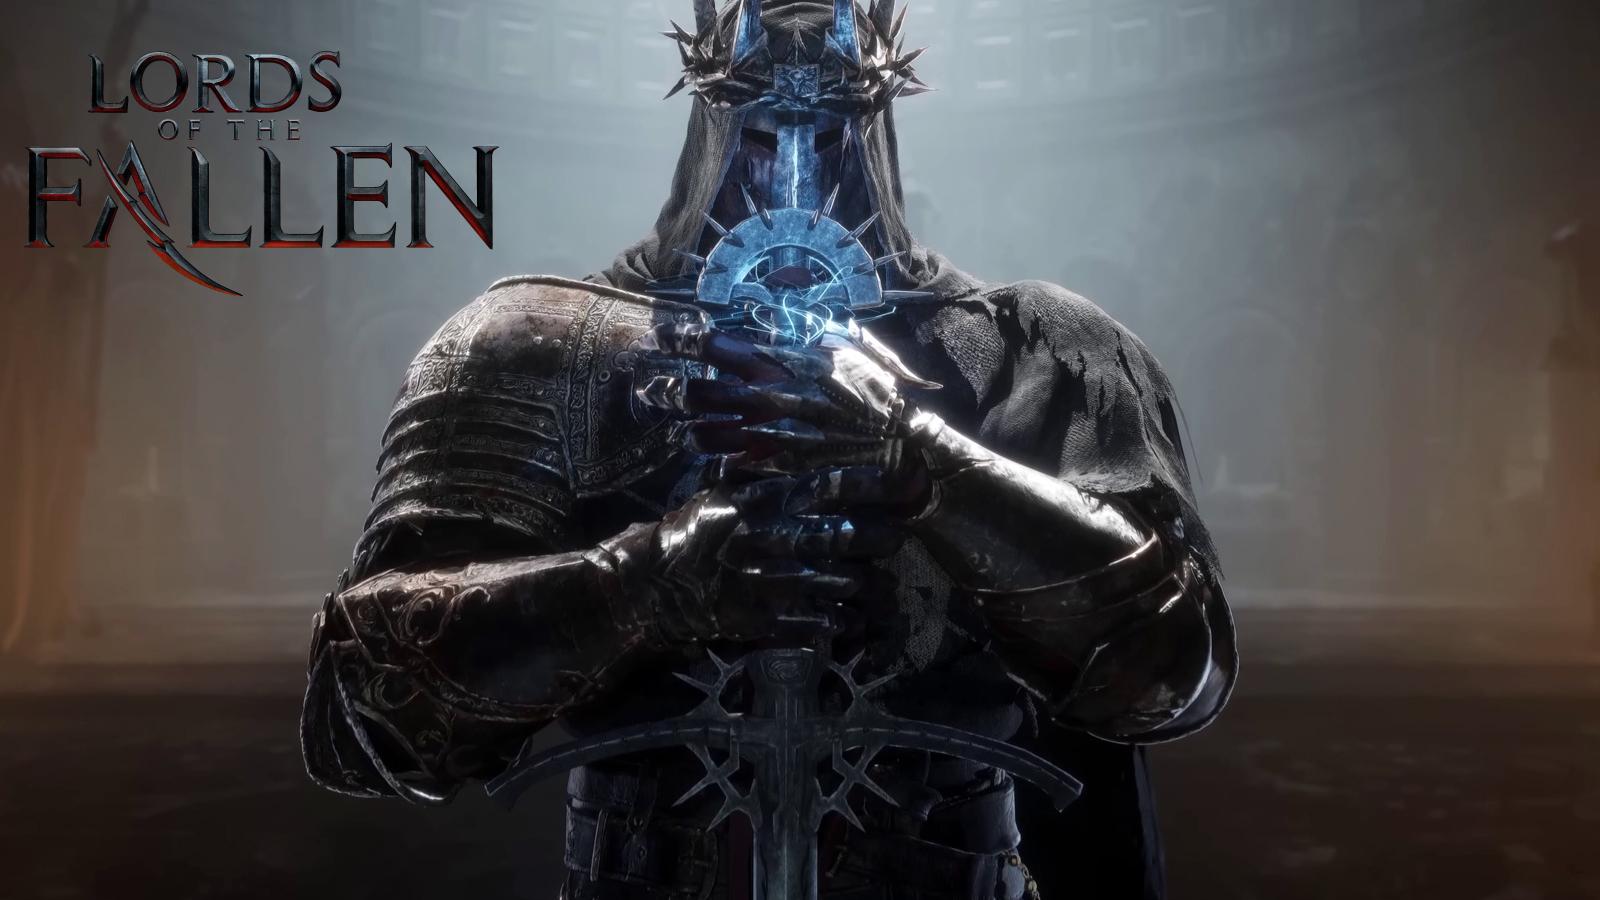 Lords of the Fallen 2 is releasing in 2023 on PS5, Xbox Series X